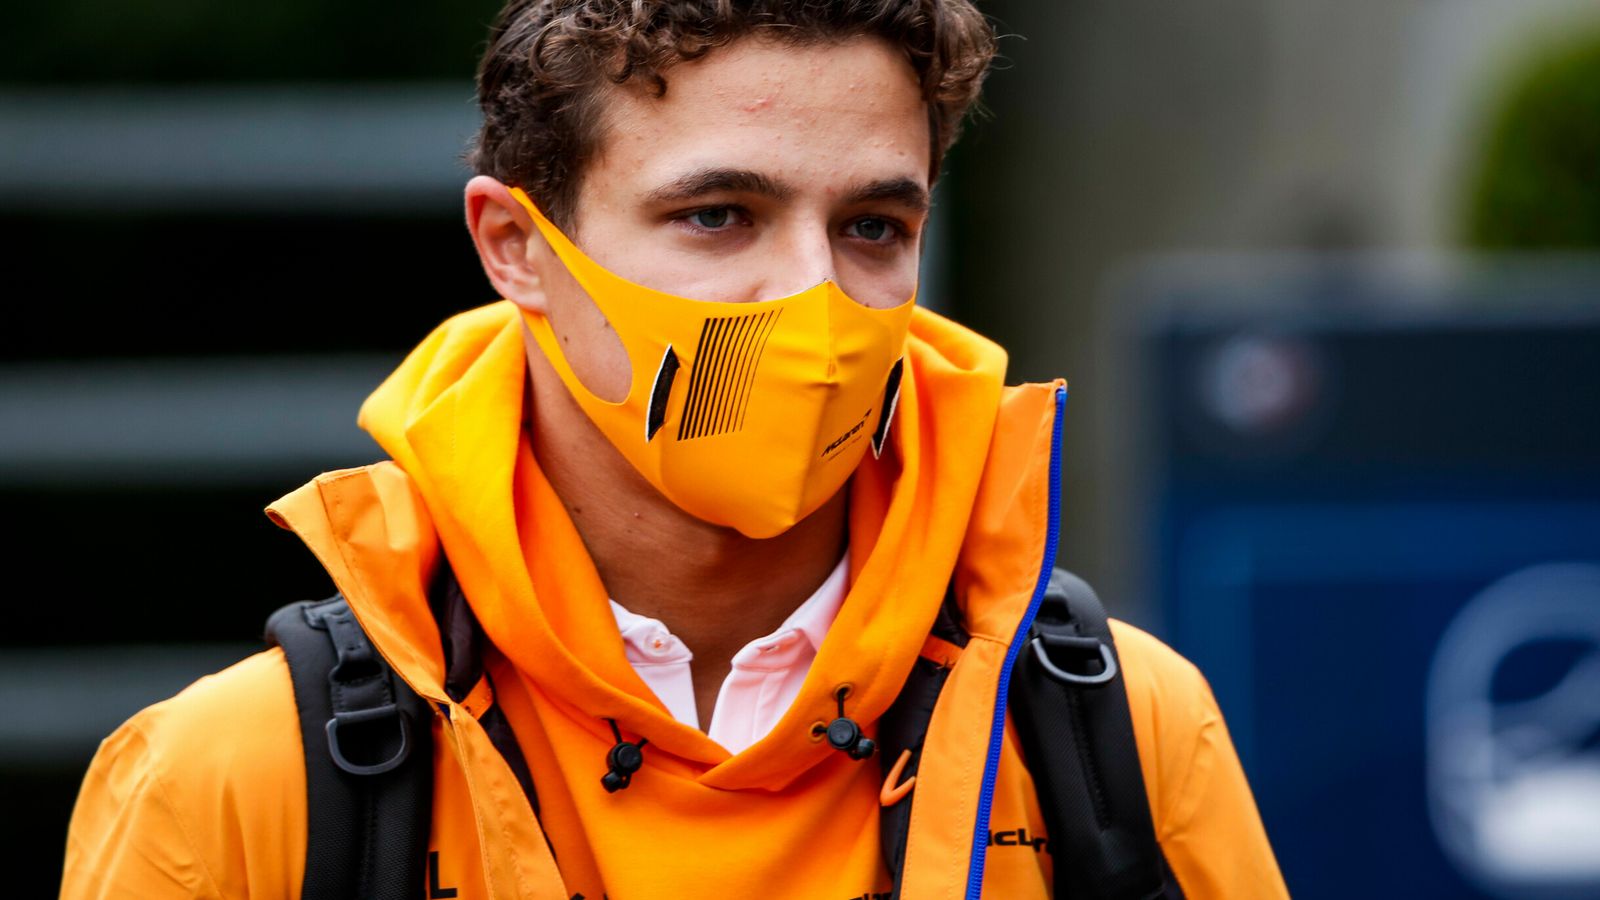 Lando Norris : Lando Norris Opens Up About His Mental Health Wtf1 / The ...